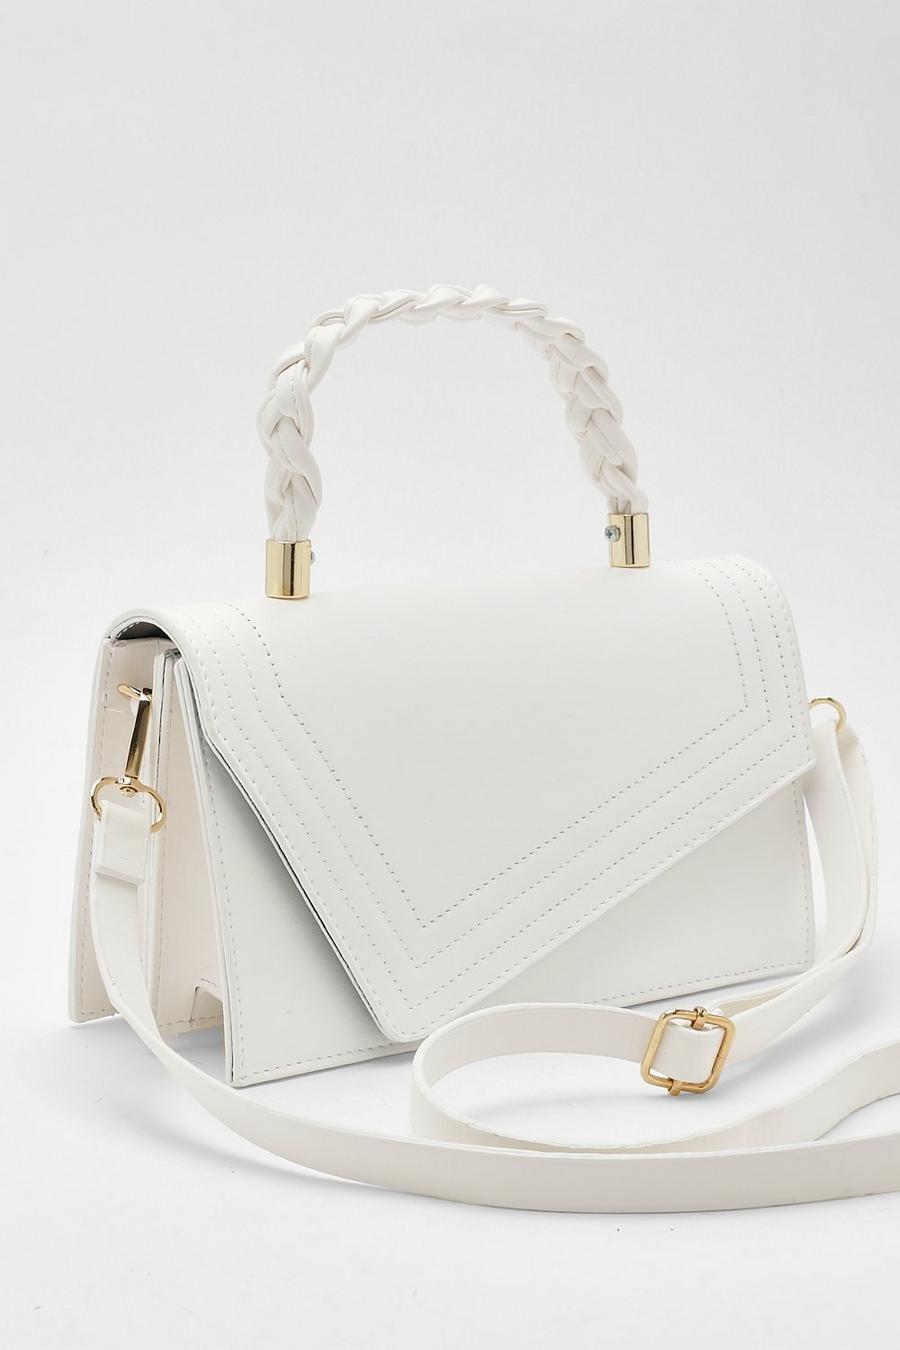 boohoo Braid Handle Structured Cross Body Bag - White - One Size